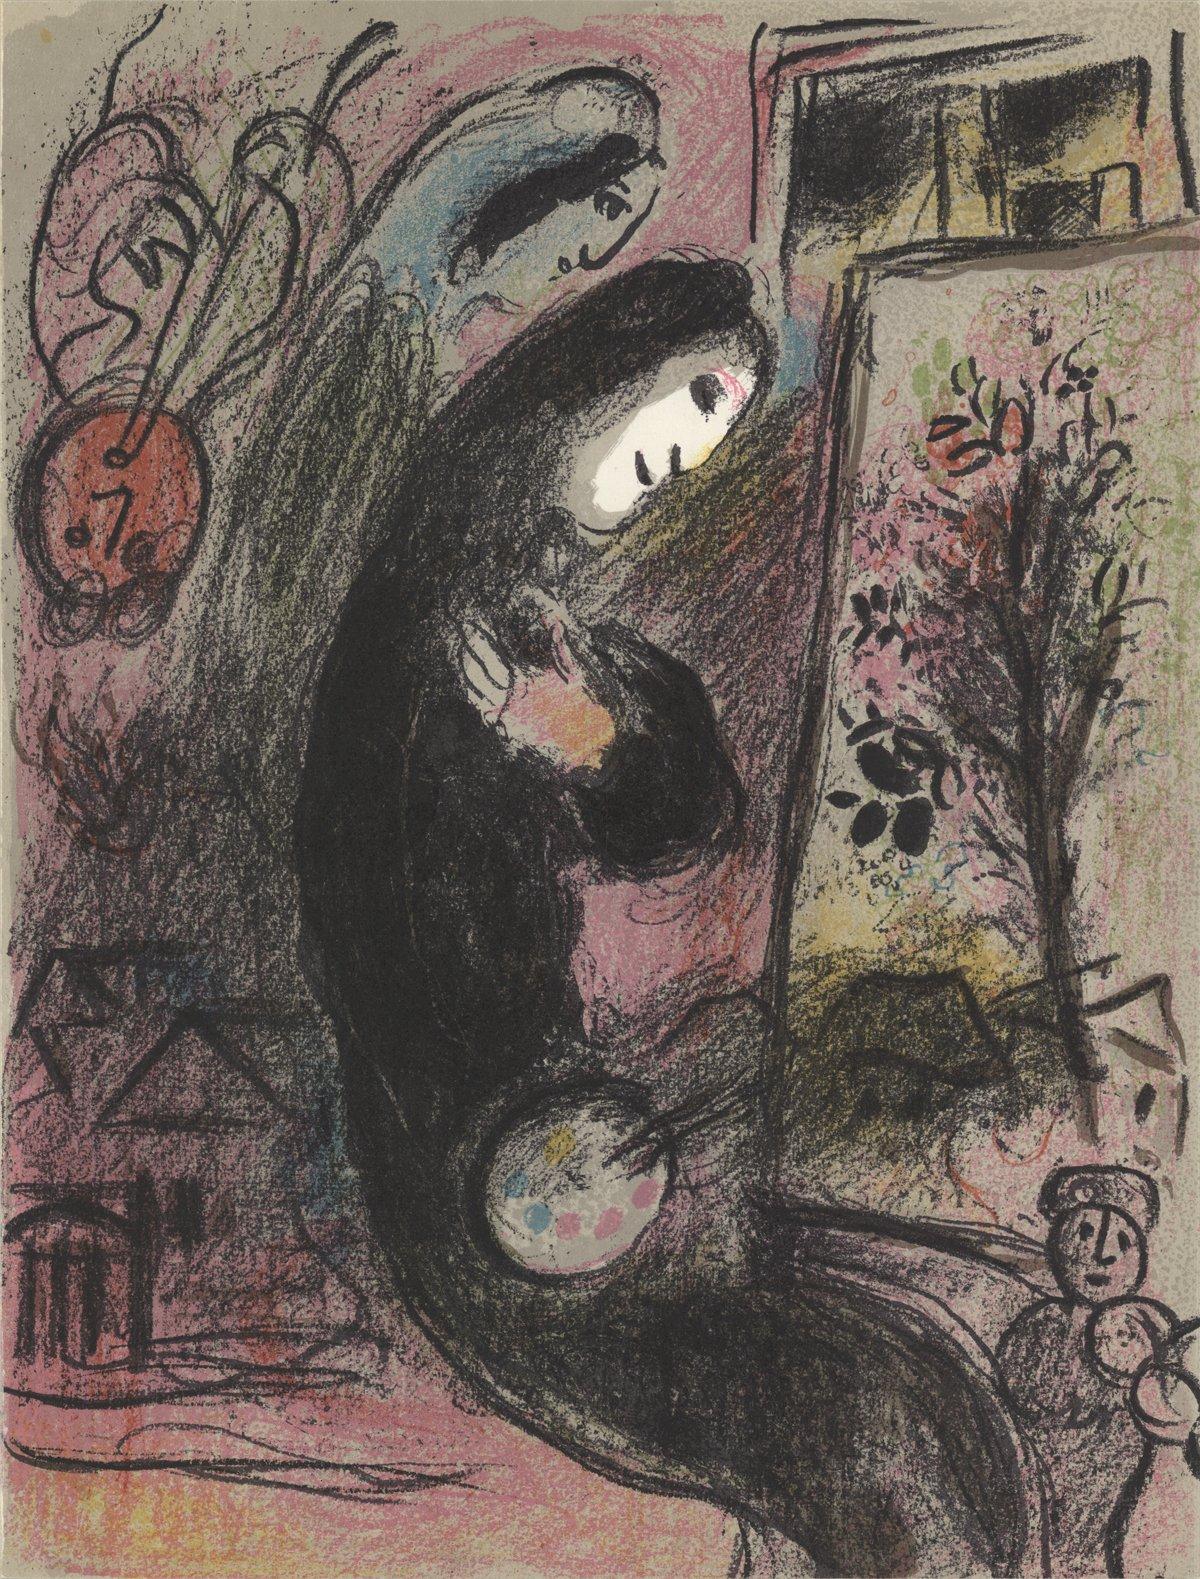 Paper Size: 12.5 x 9.5 inches ( 31.75 x 24.13 cm )
 Image Size: 12.5 x 9.5 inches ( 31.75 x 24.13 cm )
 Framed: No
 Condition: A: Mint
 
 Additional Details: First edition lithograph from Chagall's Lithographs Volume II.The catalogue reference is